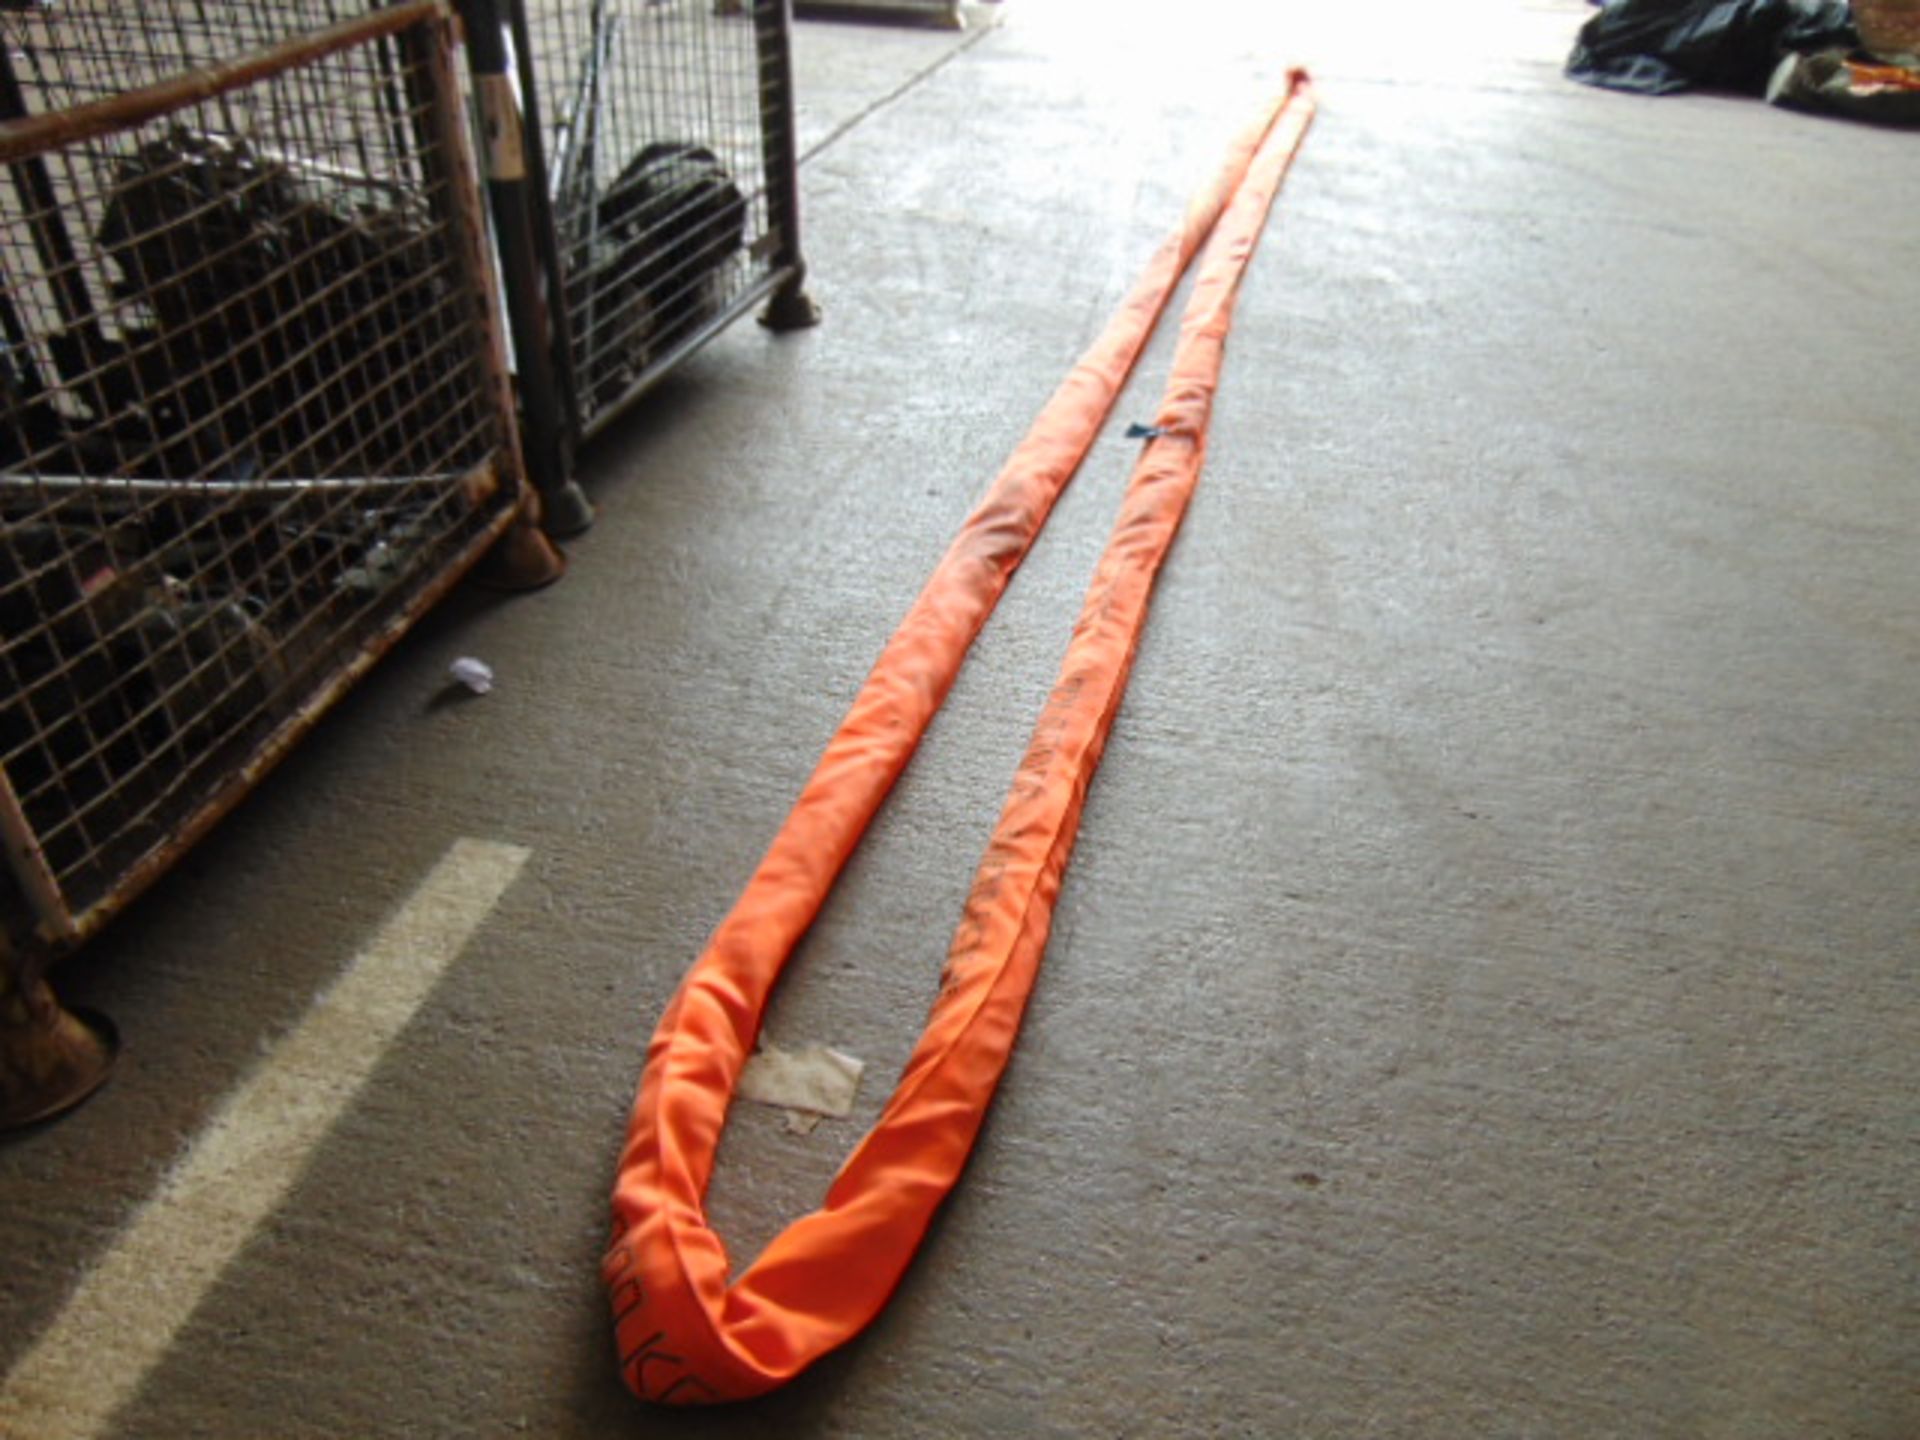 New Unused SpanSet Magnum 20,000kg Lifting/Recovery Strop from MOD - Image 3 of 6